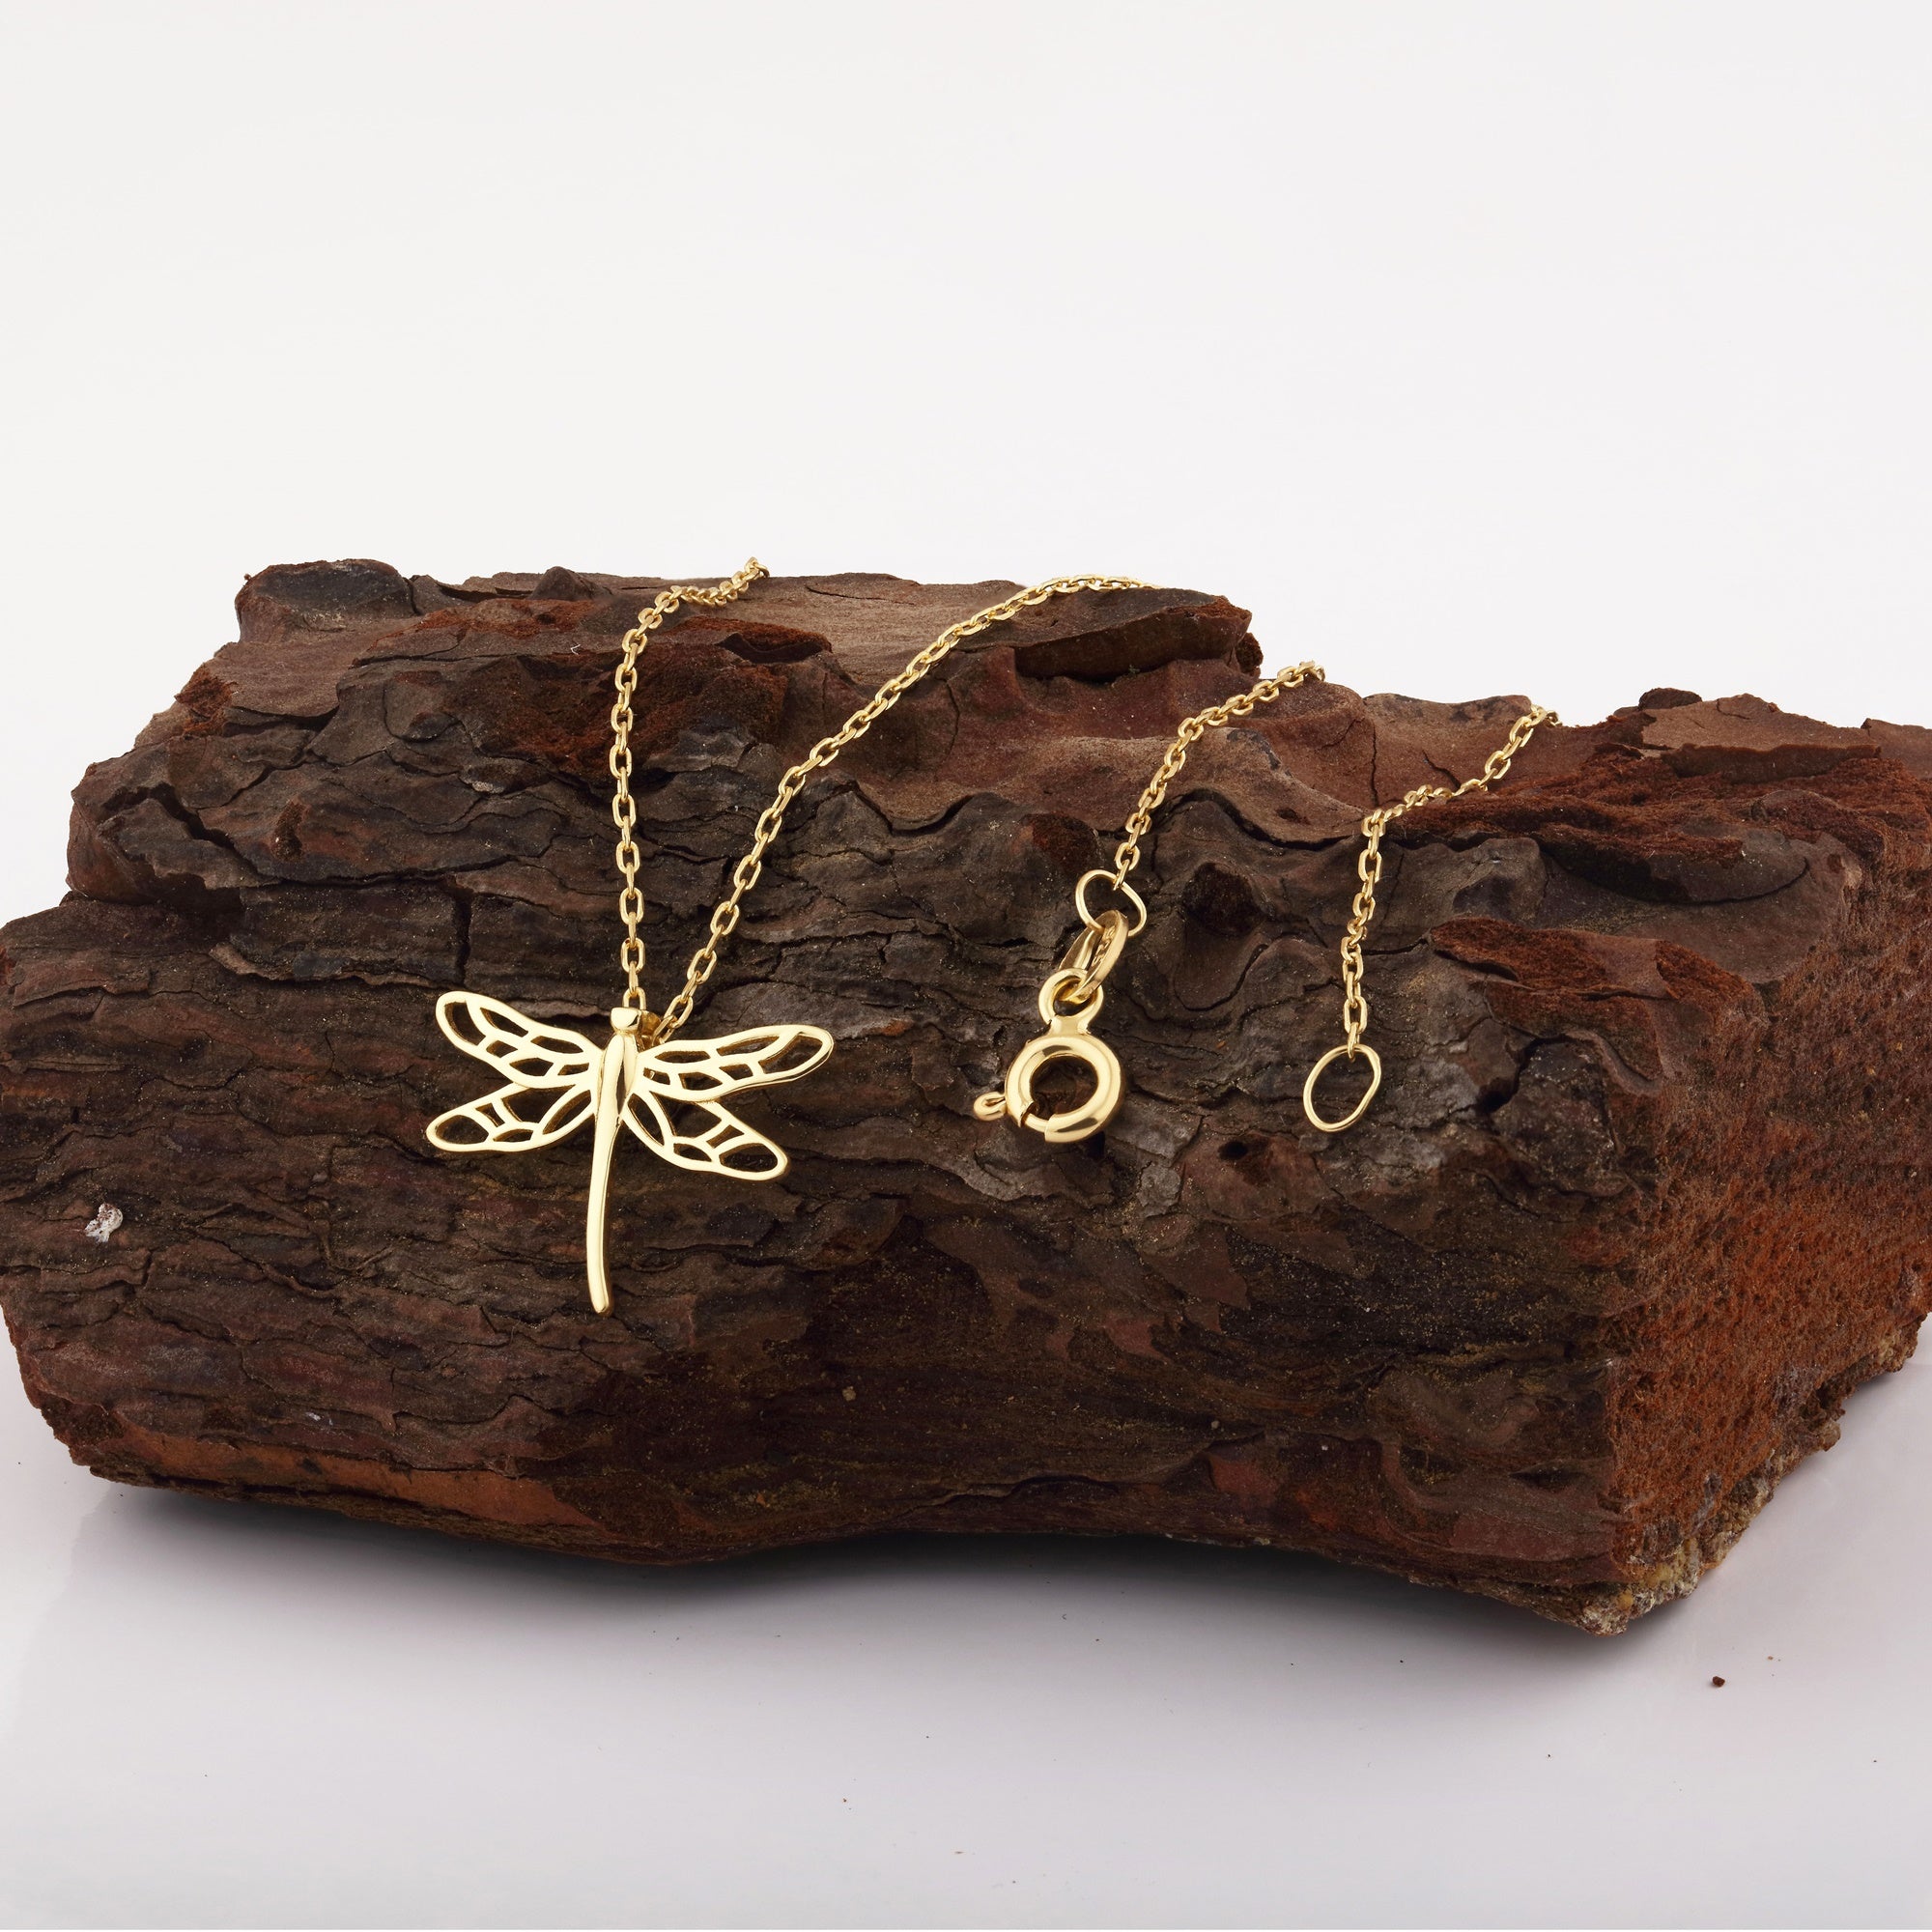 Gold Dragonfly Pendant Necklace, Gold Dragonfly Pendant Necklace with Chain